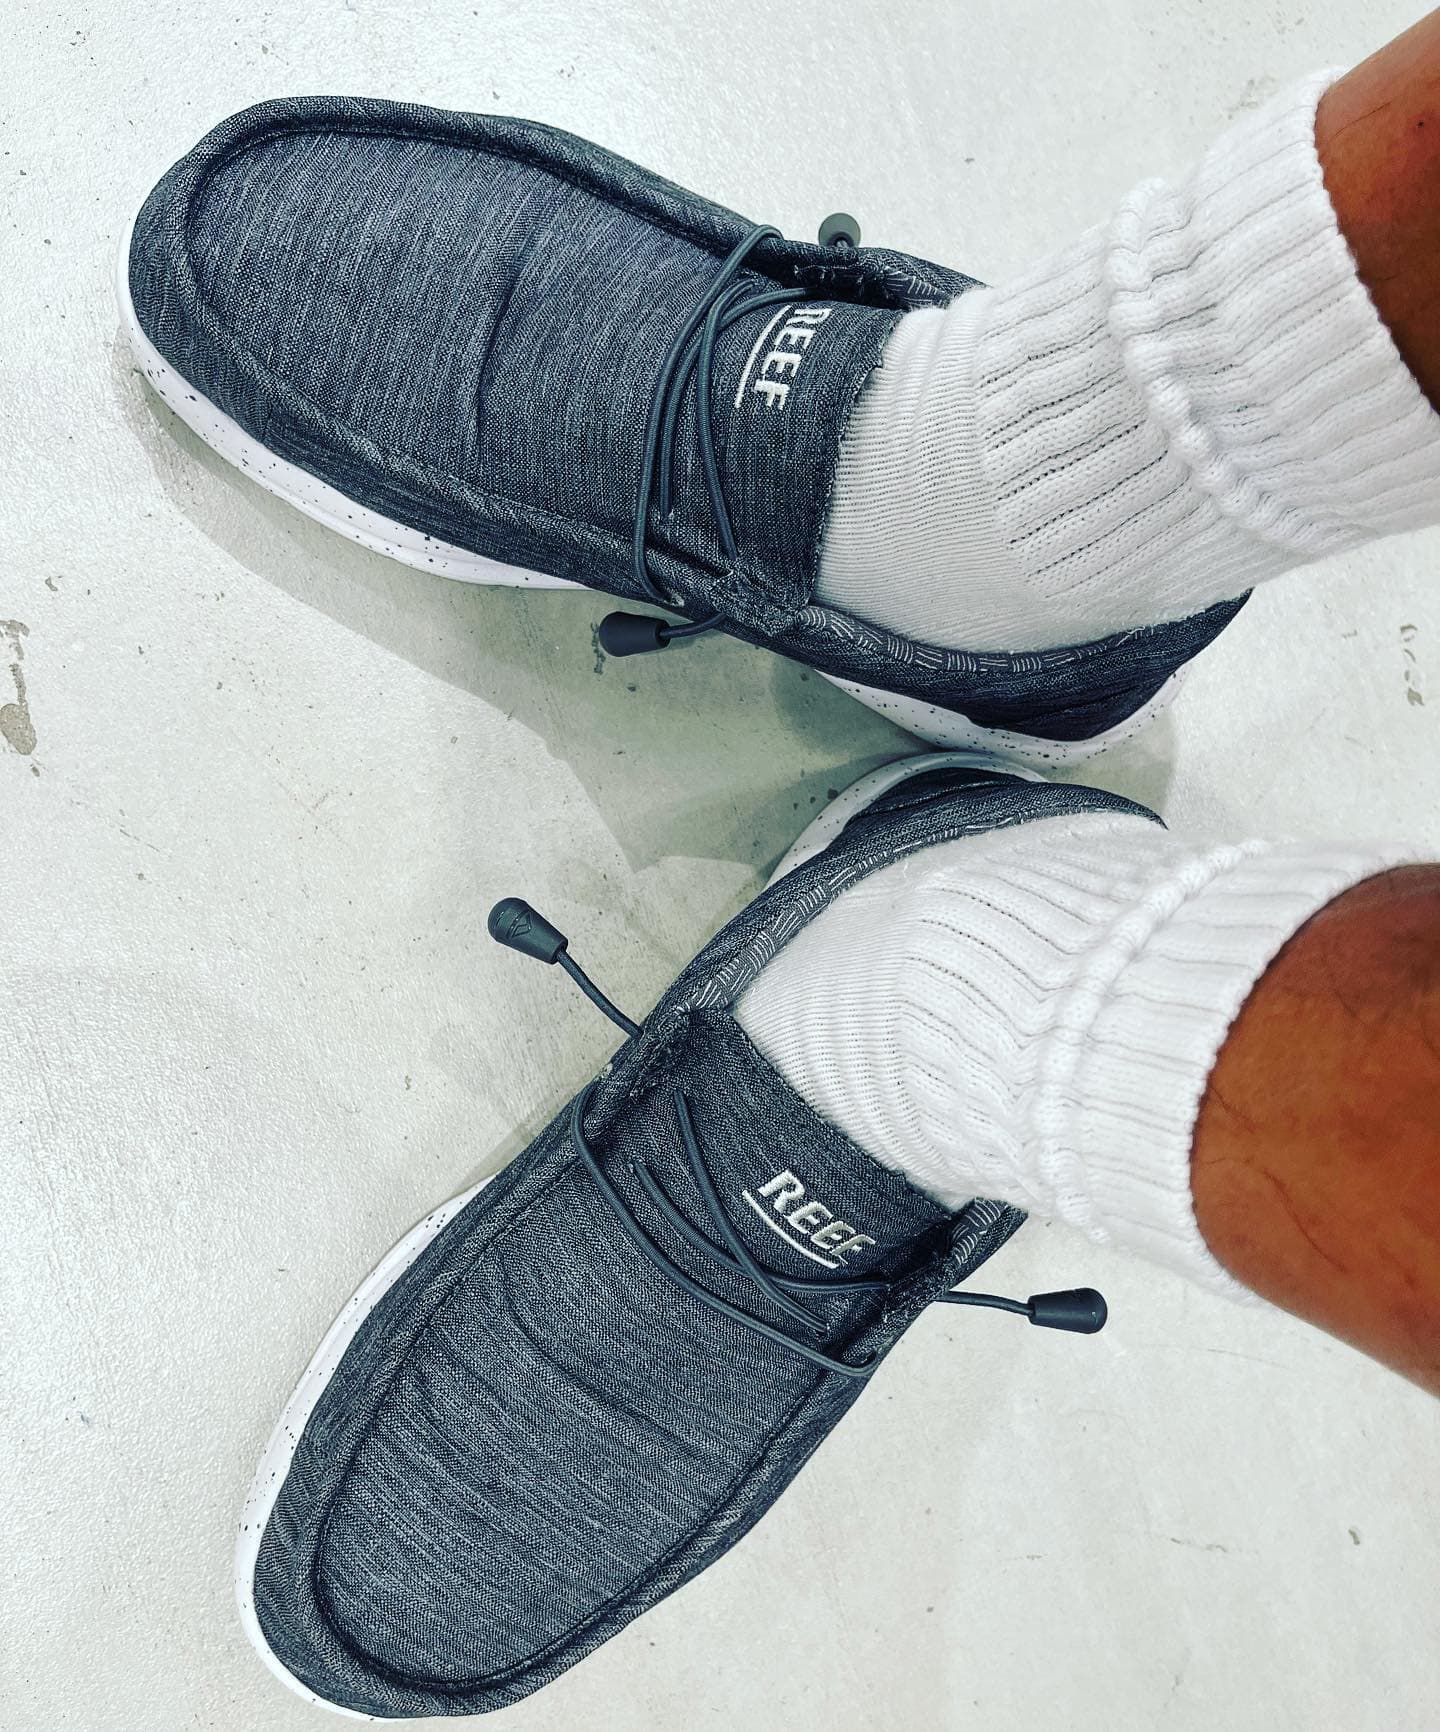 wearing a pair of reef loafers